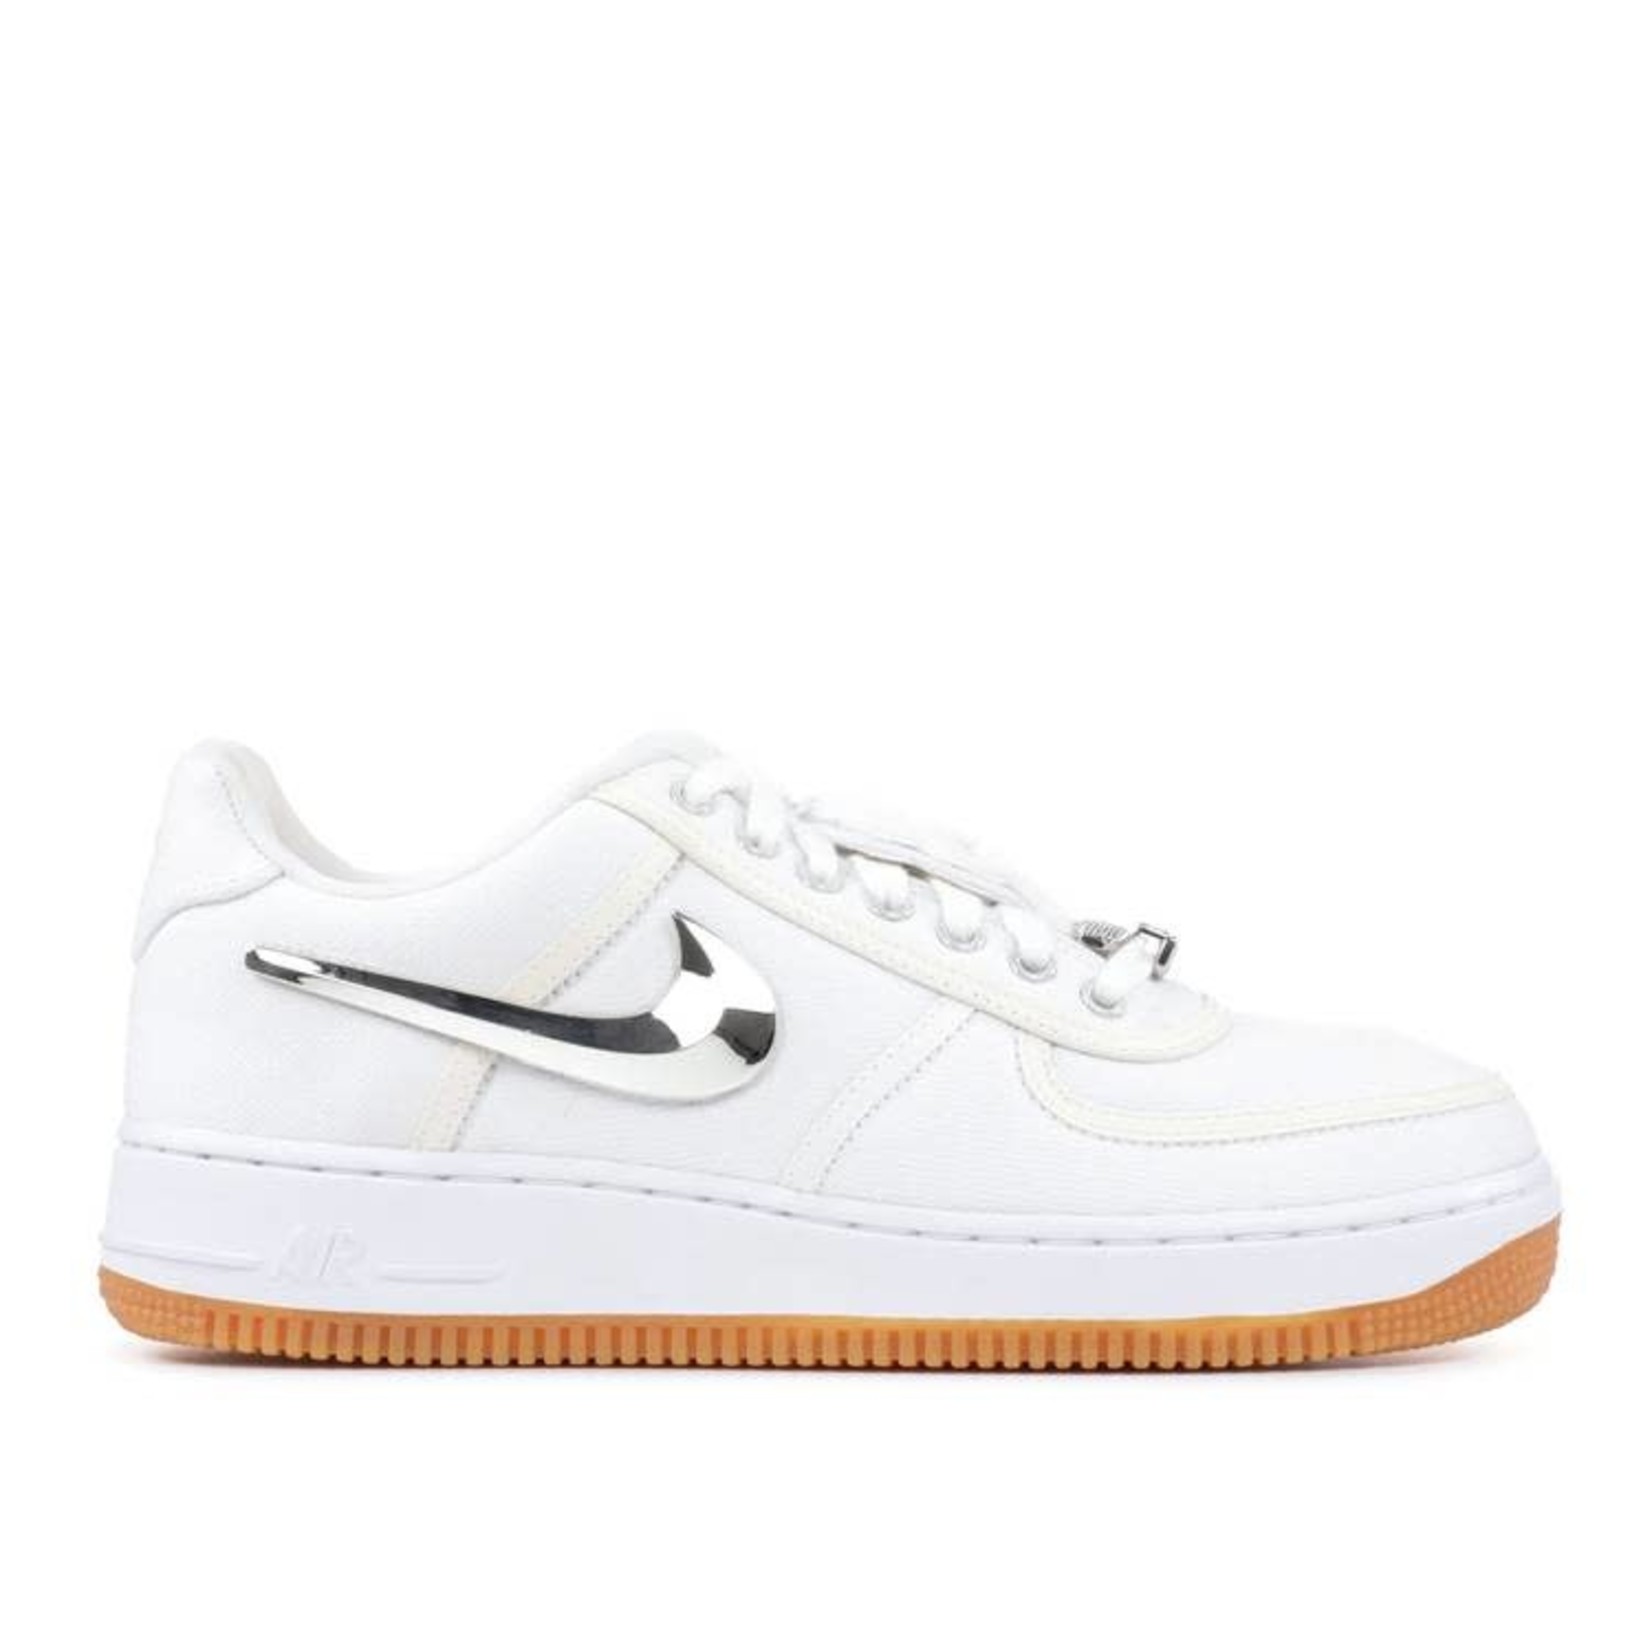 Arena Burlas Privación Nike Nike Air Force 1 Low Travis Scott (AF100) (damaged box) Size 10, DS  BRAND NEW - SoleSeattle